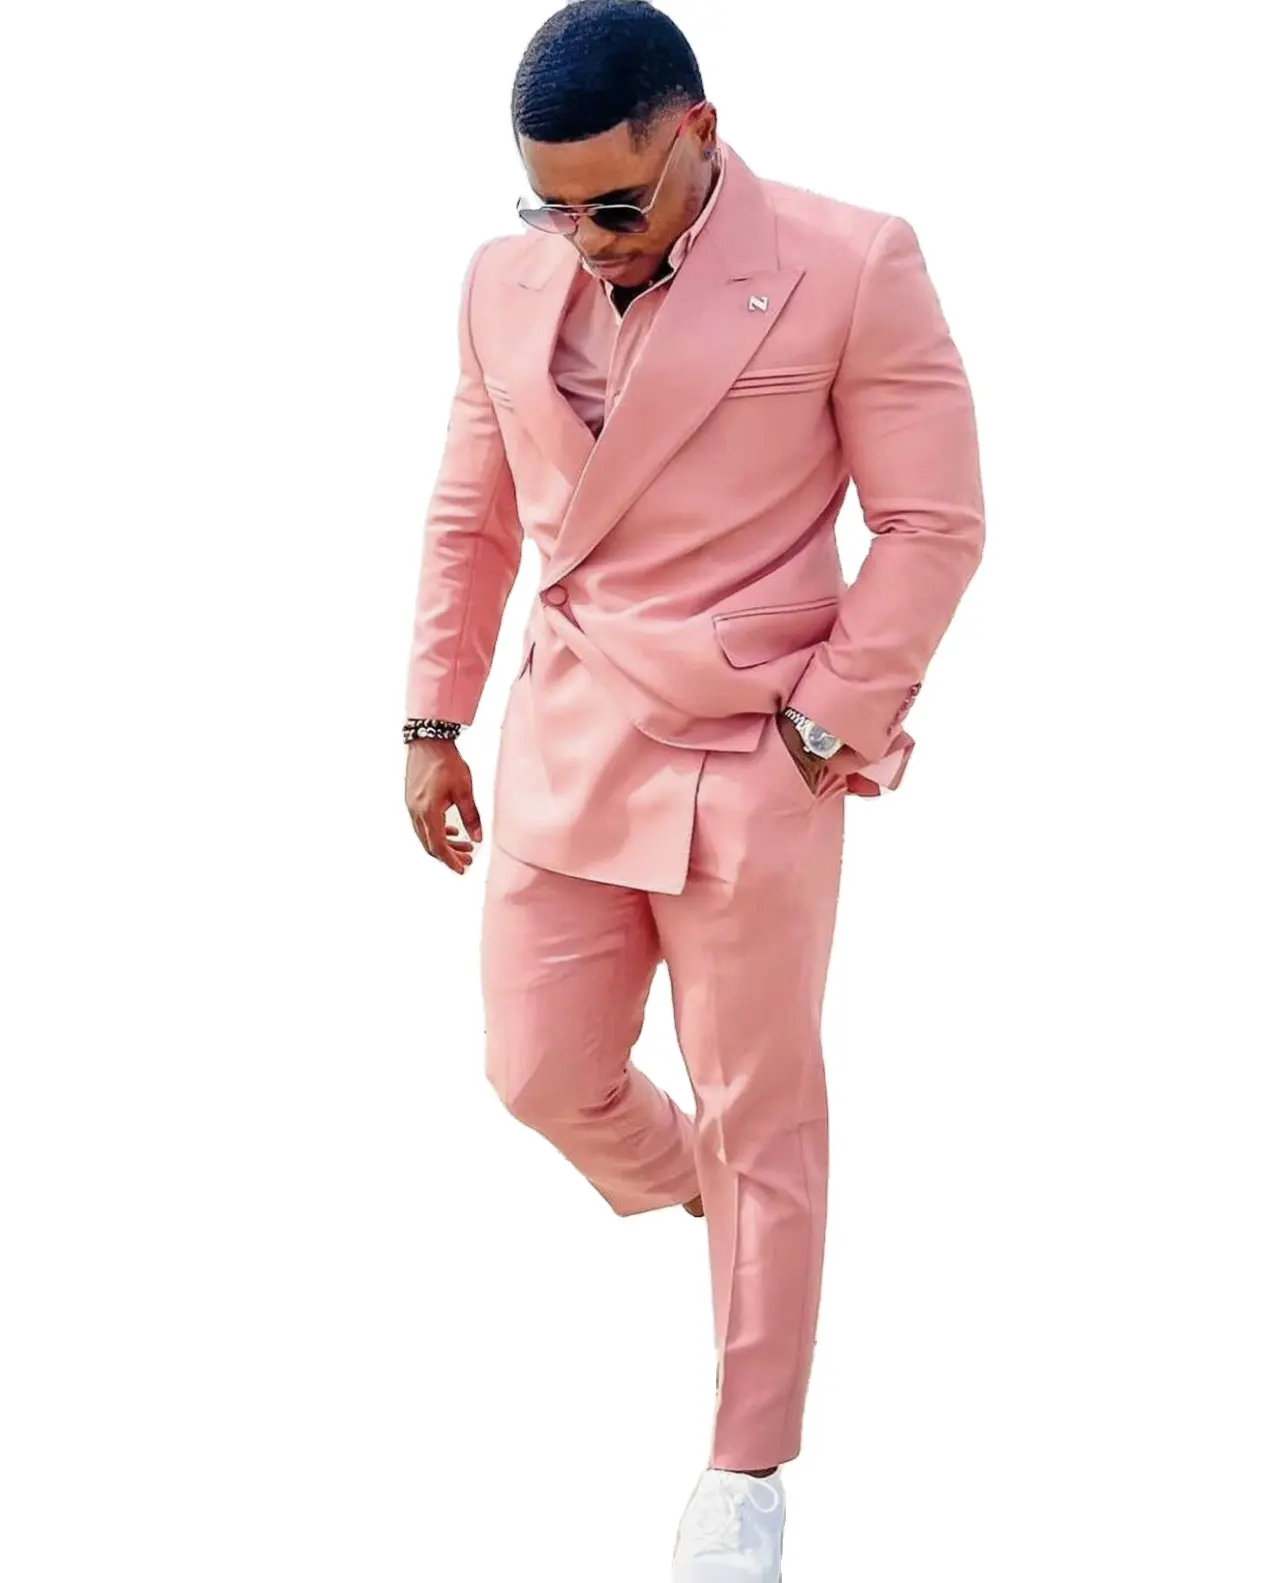 Pink Suit for Men Slim Fit 2 Piece 1 Button Blazer Pants Design Formal Business Male Clothing Sets Wedding Grooms Outfits